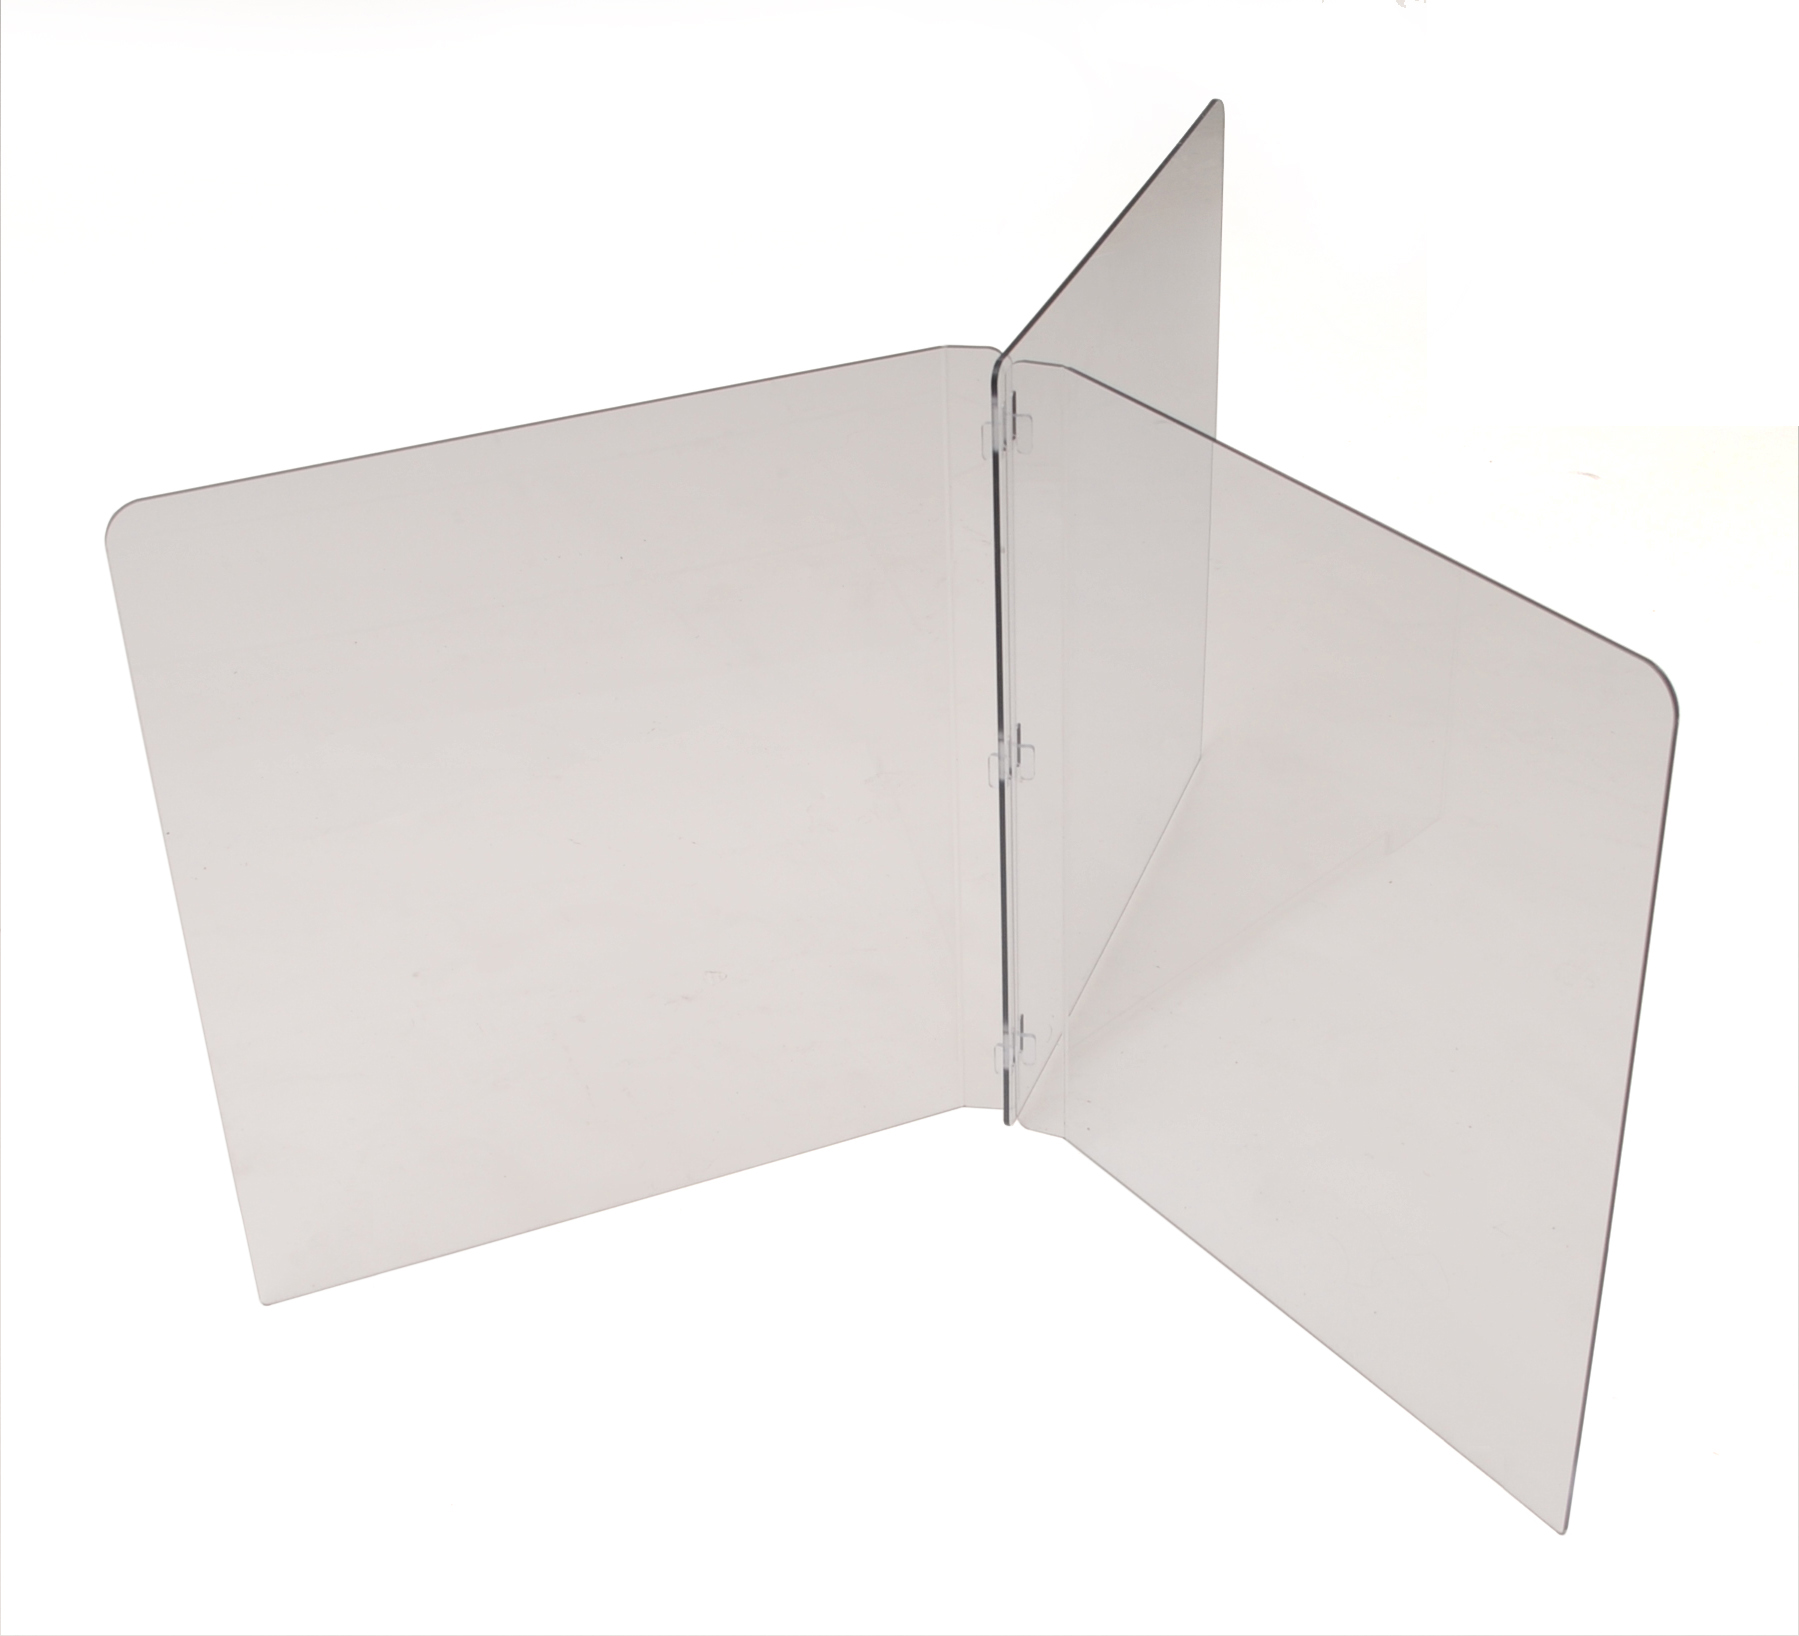 3-Way and 4-Way Dividers for Square or Round Tables